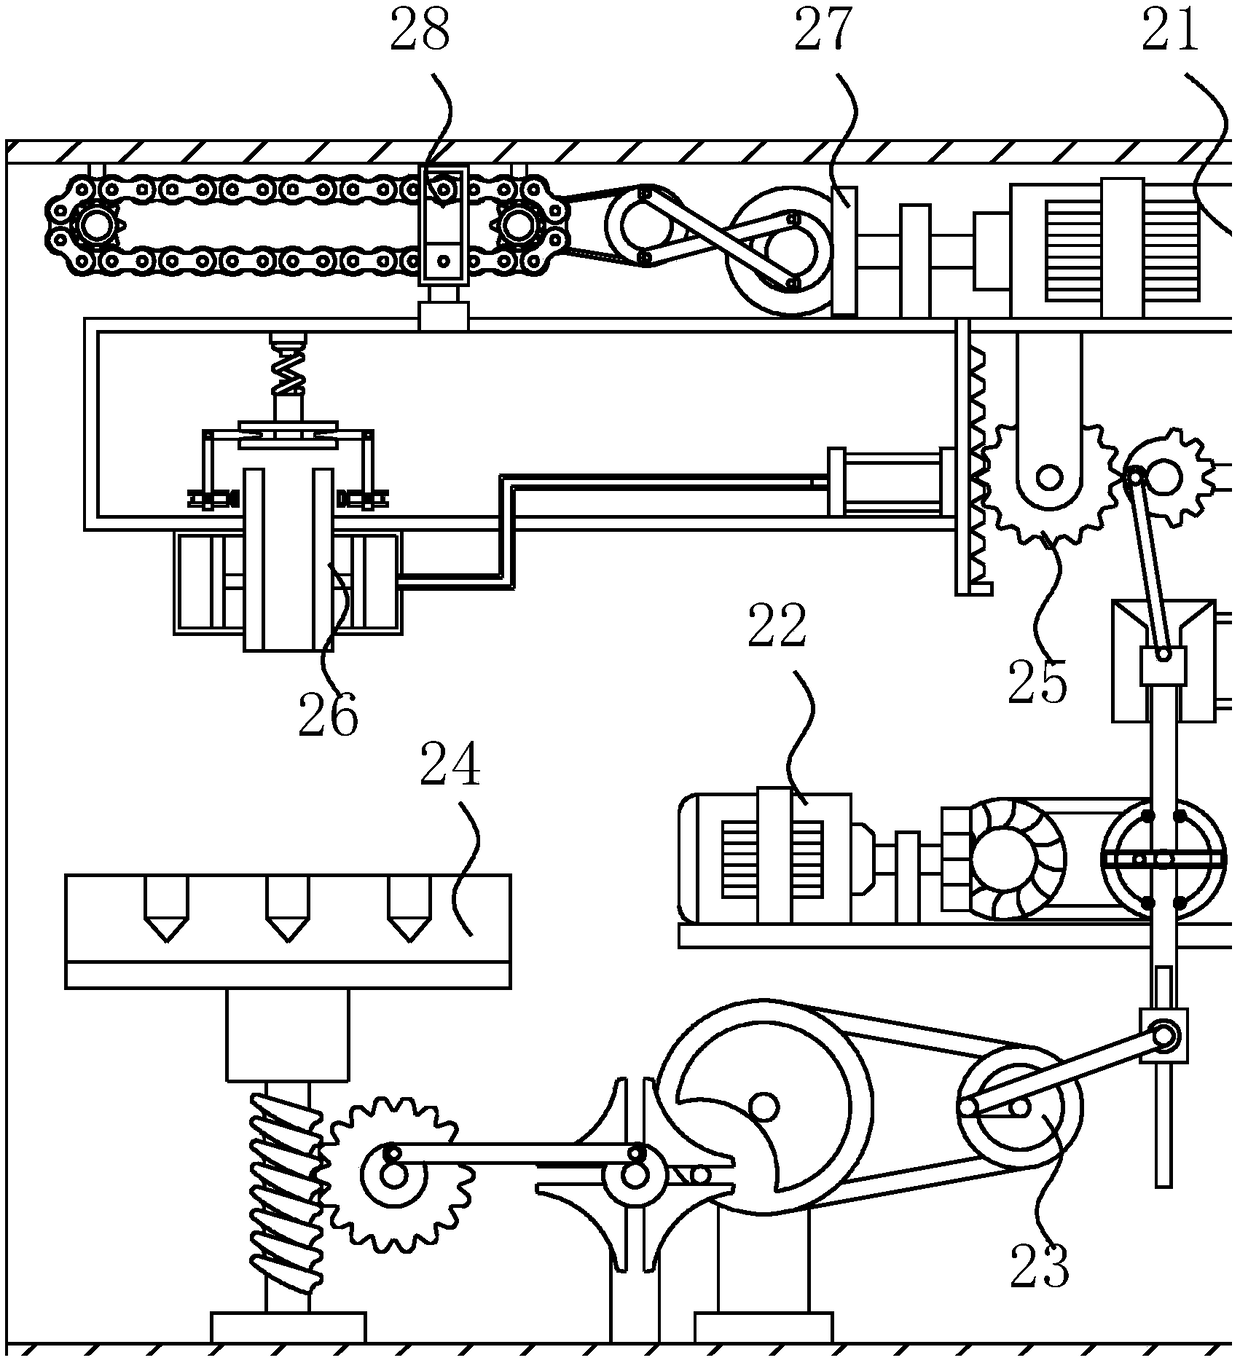 Tool changing device for lathe